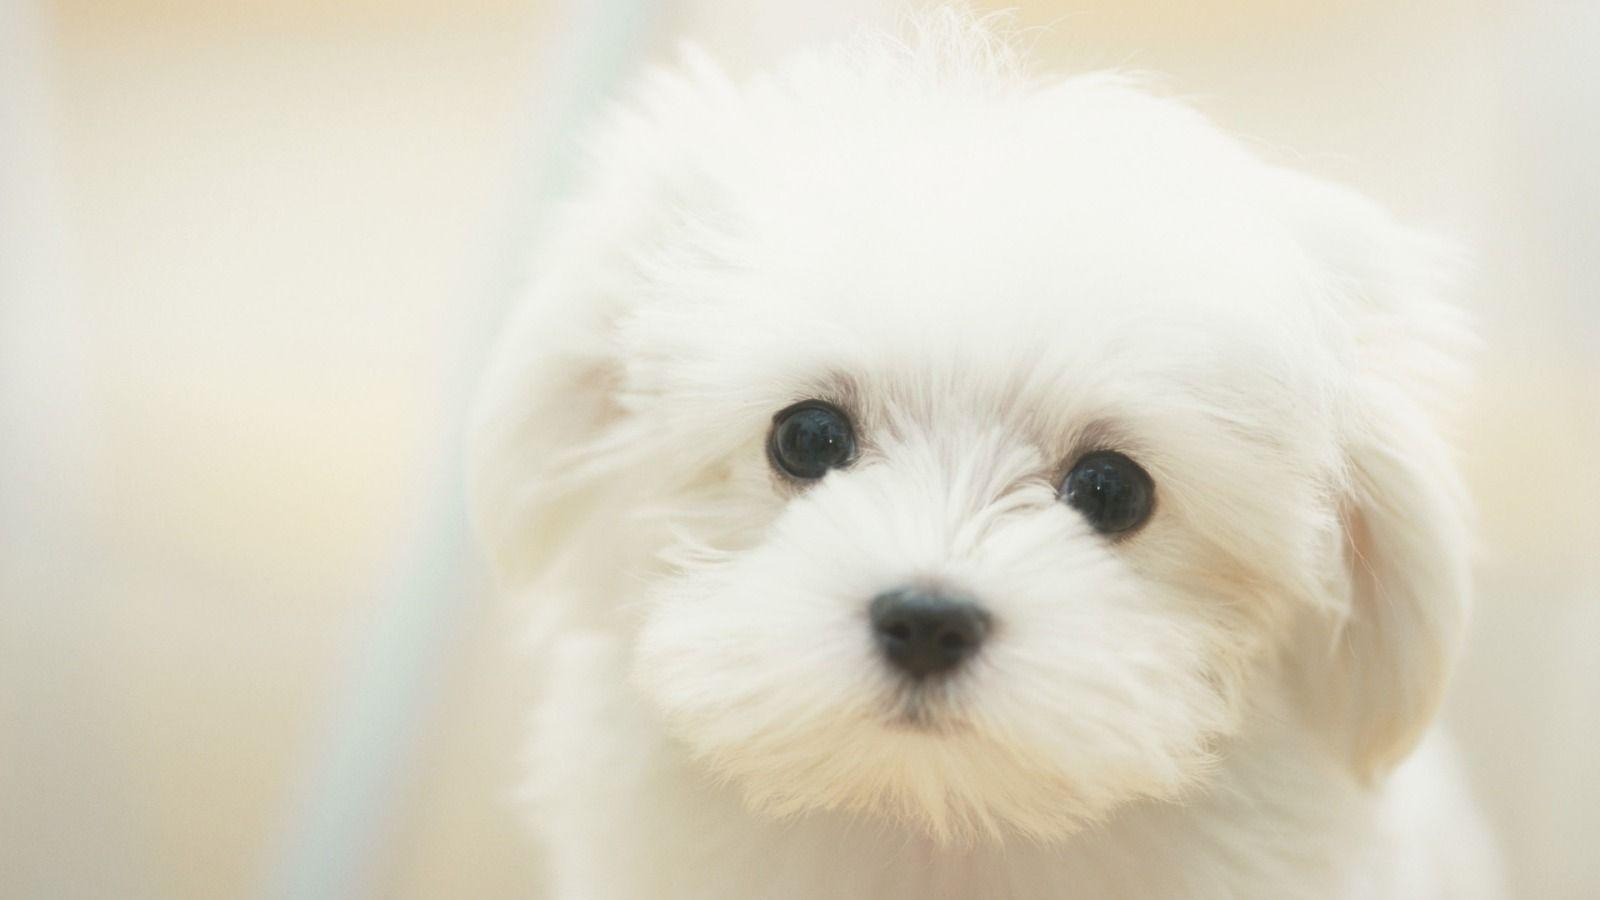 Puppies Cute Wallpapers - Wallpaper Cave